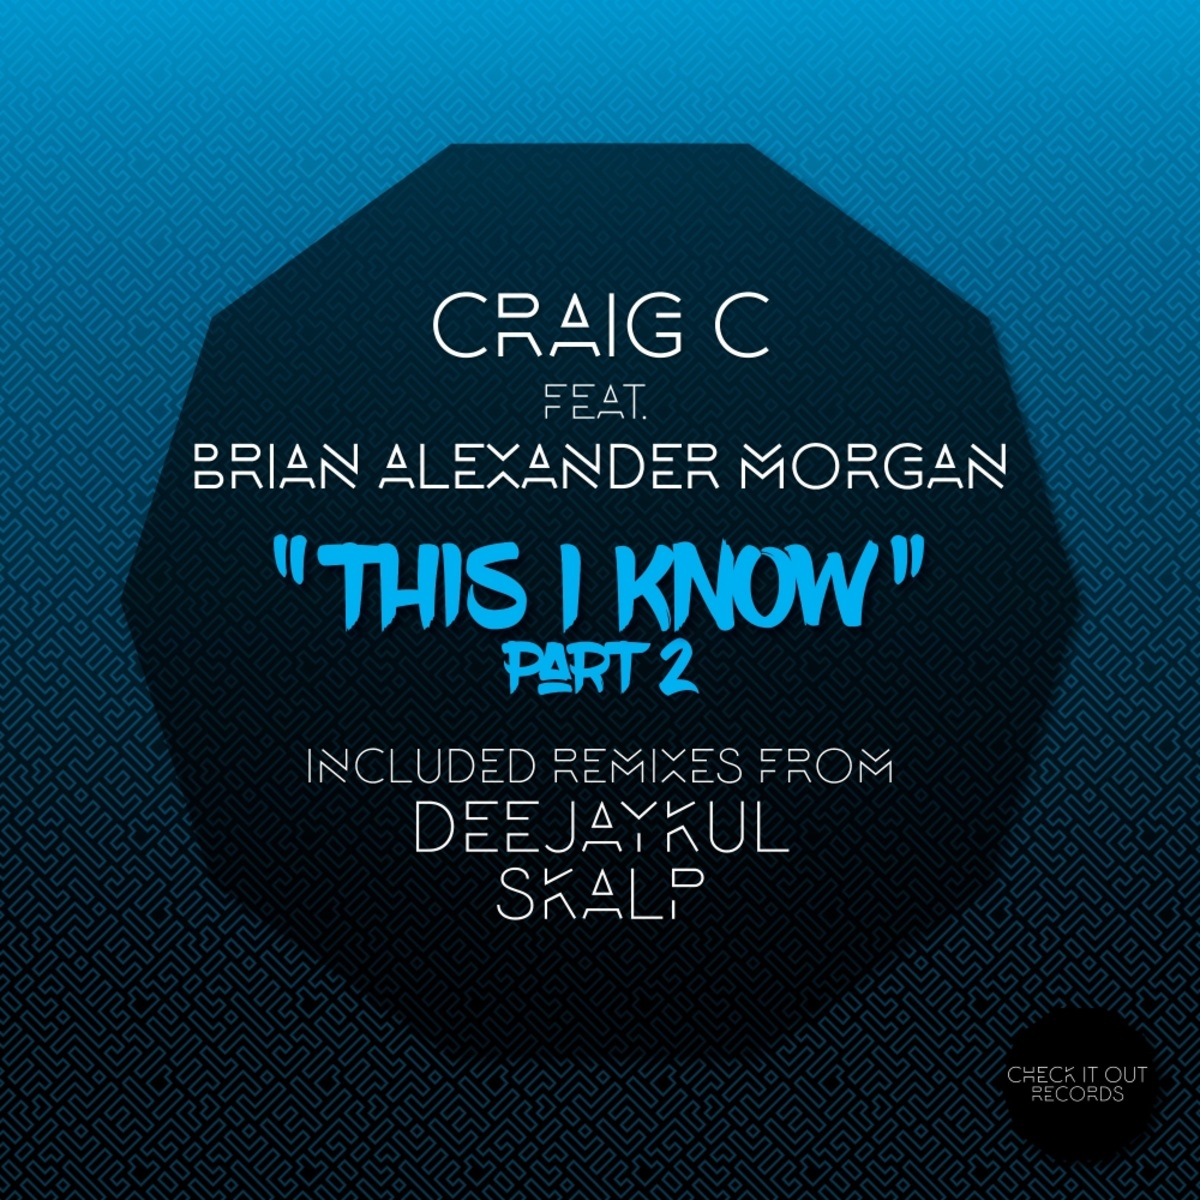 Craig C - This I Know, Pt. 2 / Check It Out Records